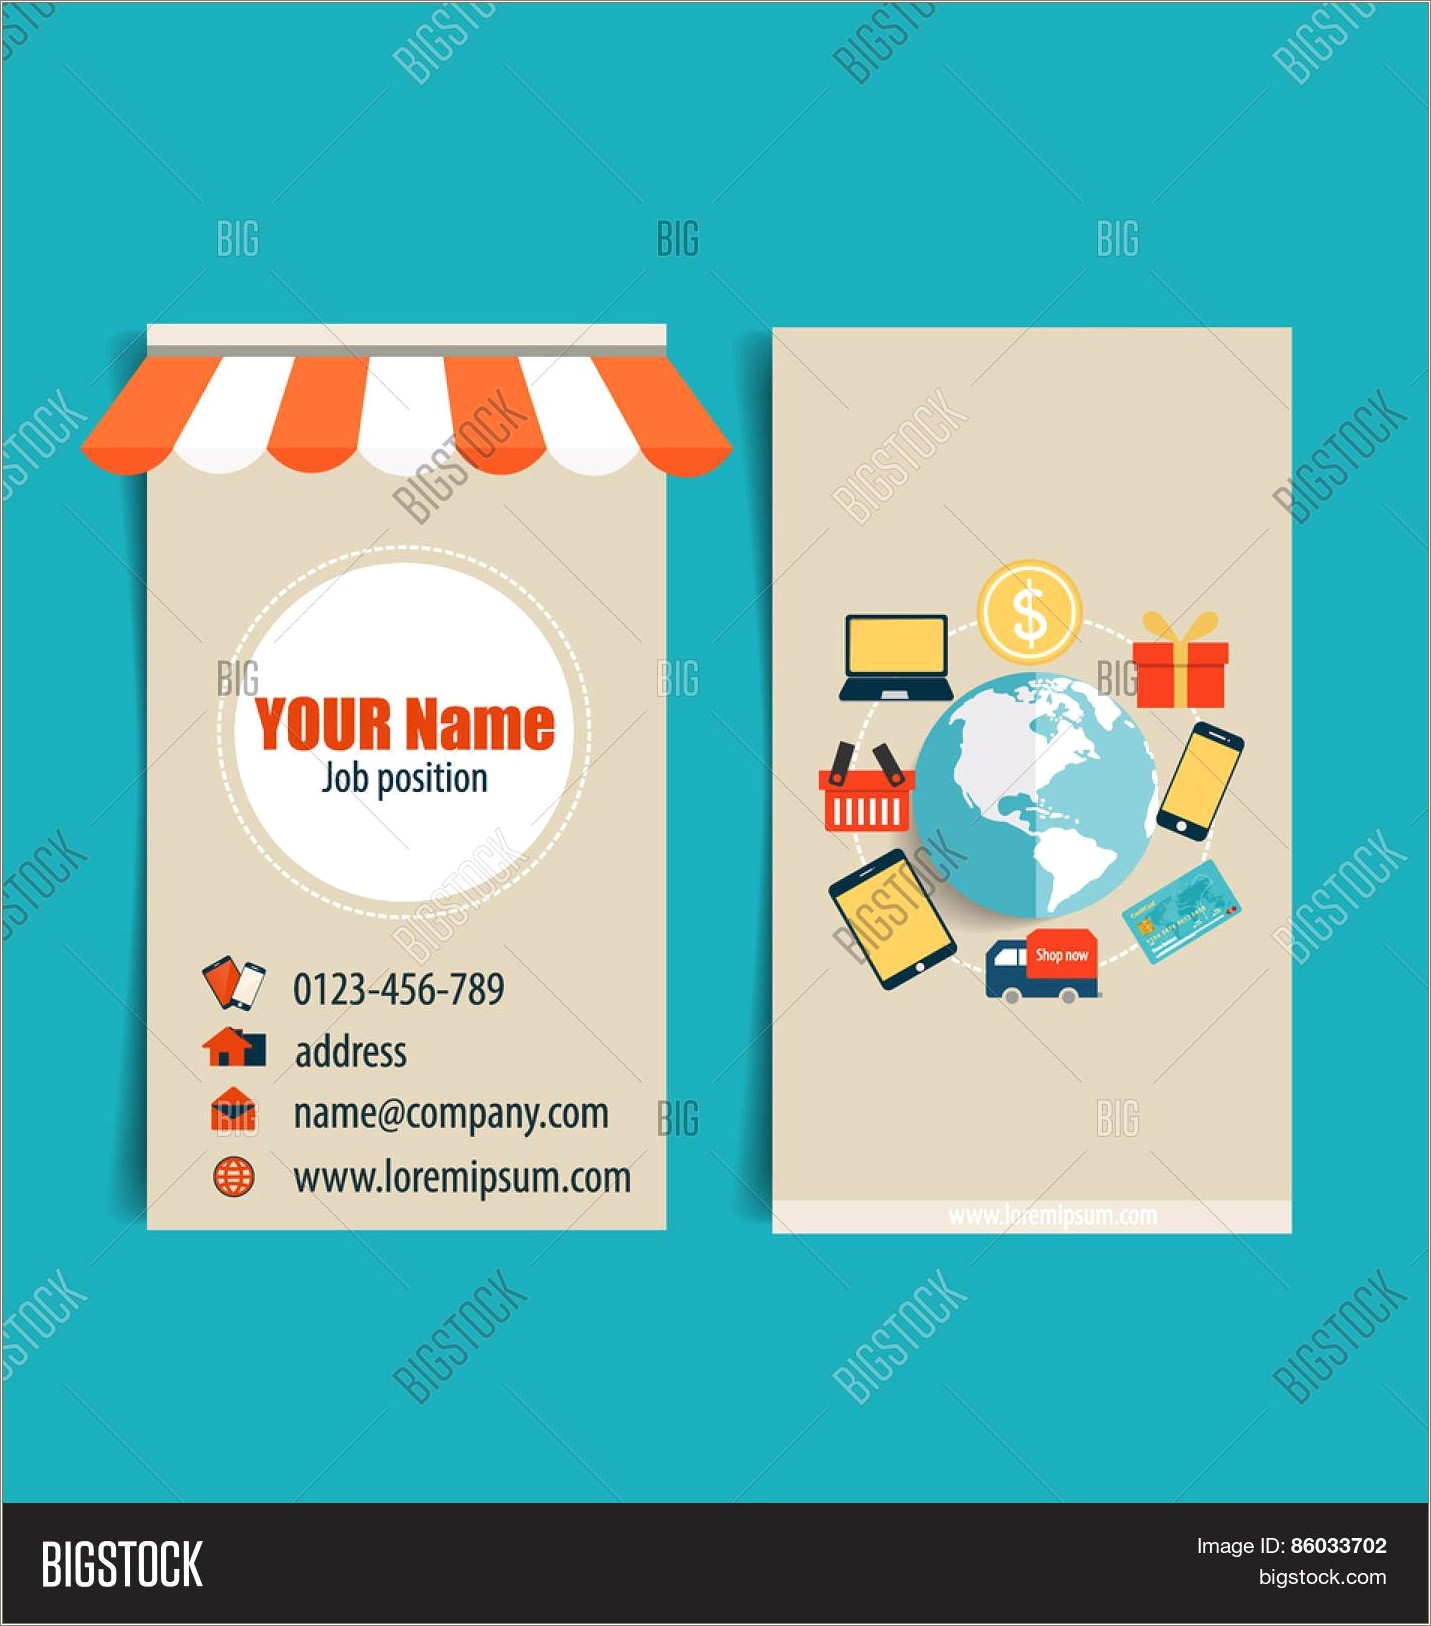 Free Ecommerance Theme Business Card Templates